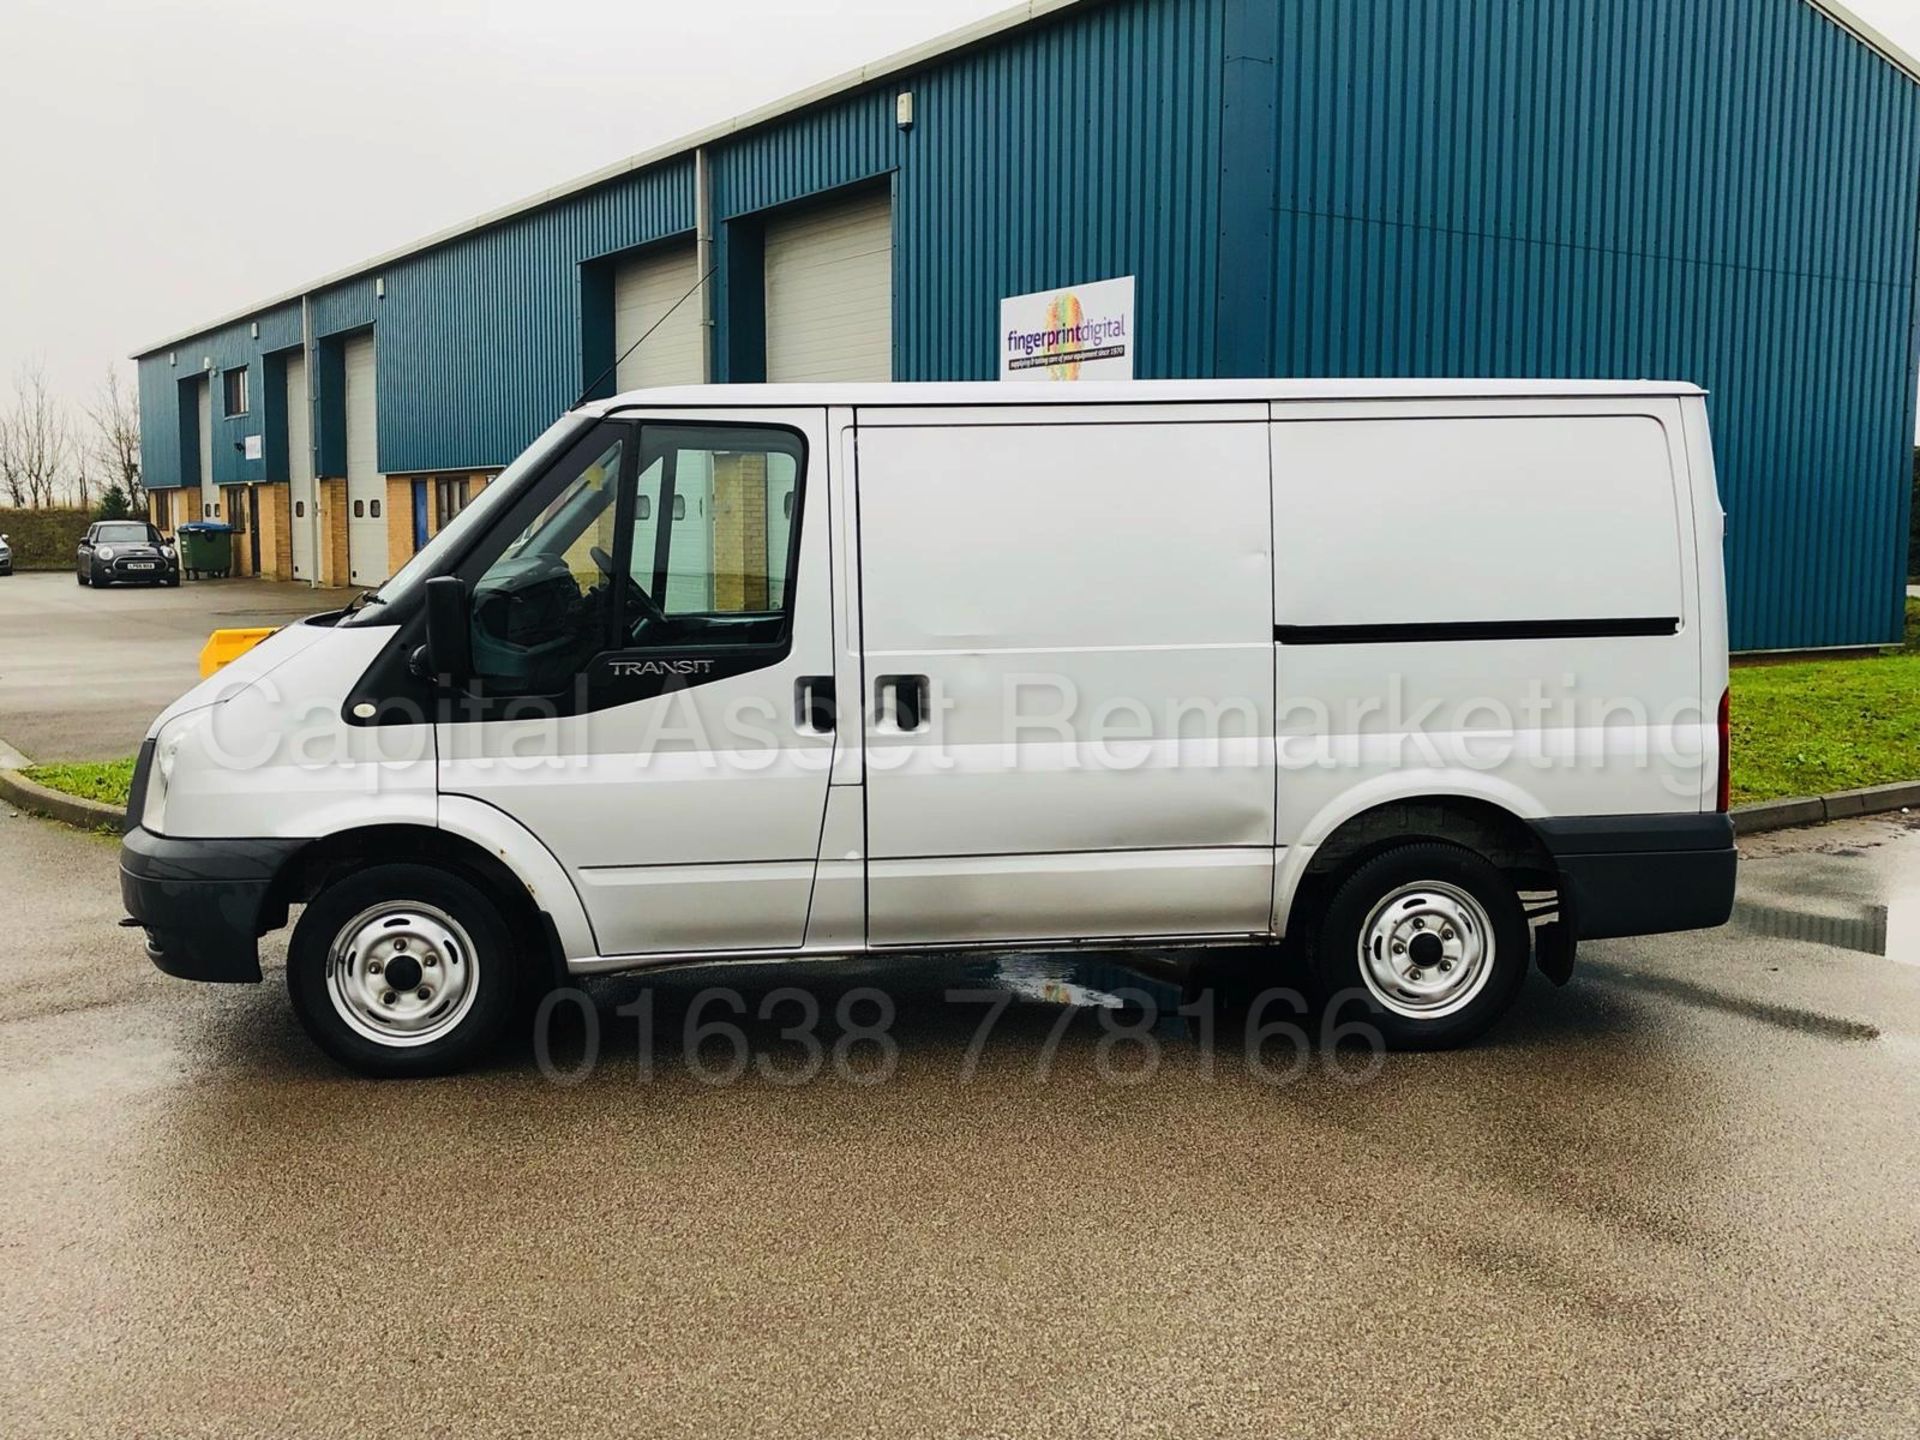 FORD TRANSIT 85 T260S FWD 'SWB' (2011 MODEL) '2.2 TDCI - 85 BHP - 5 SPEED' **ULTRA LOW MILES** - Image 4 of 22